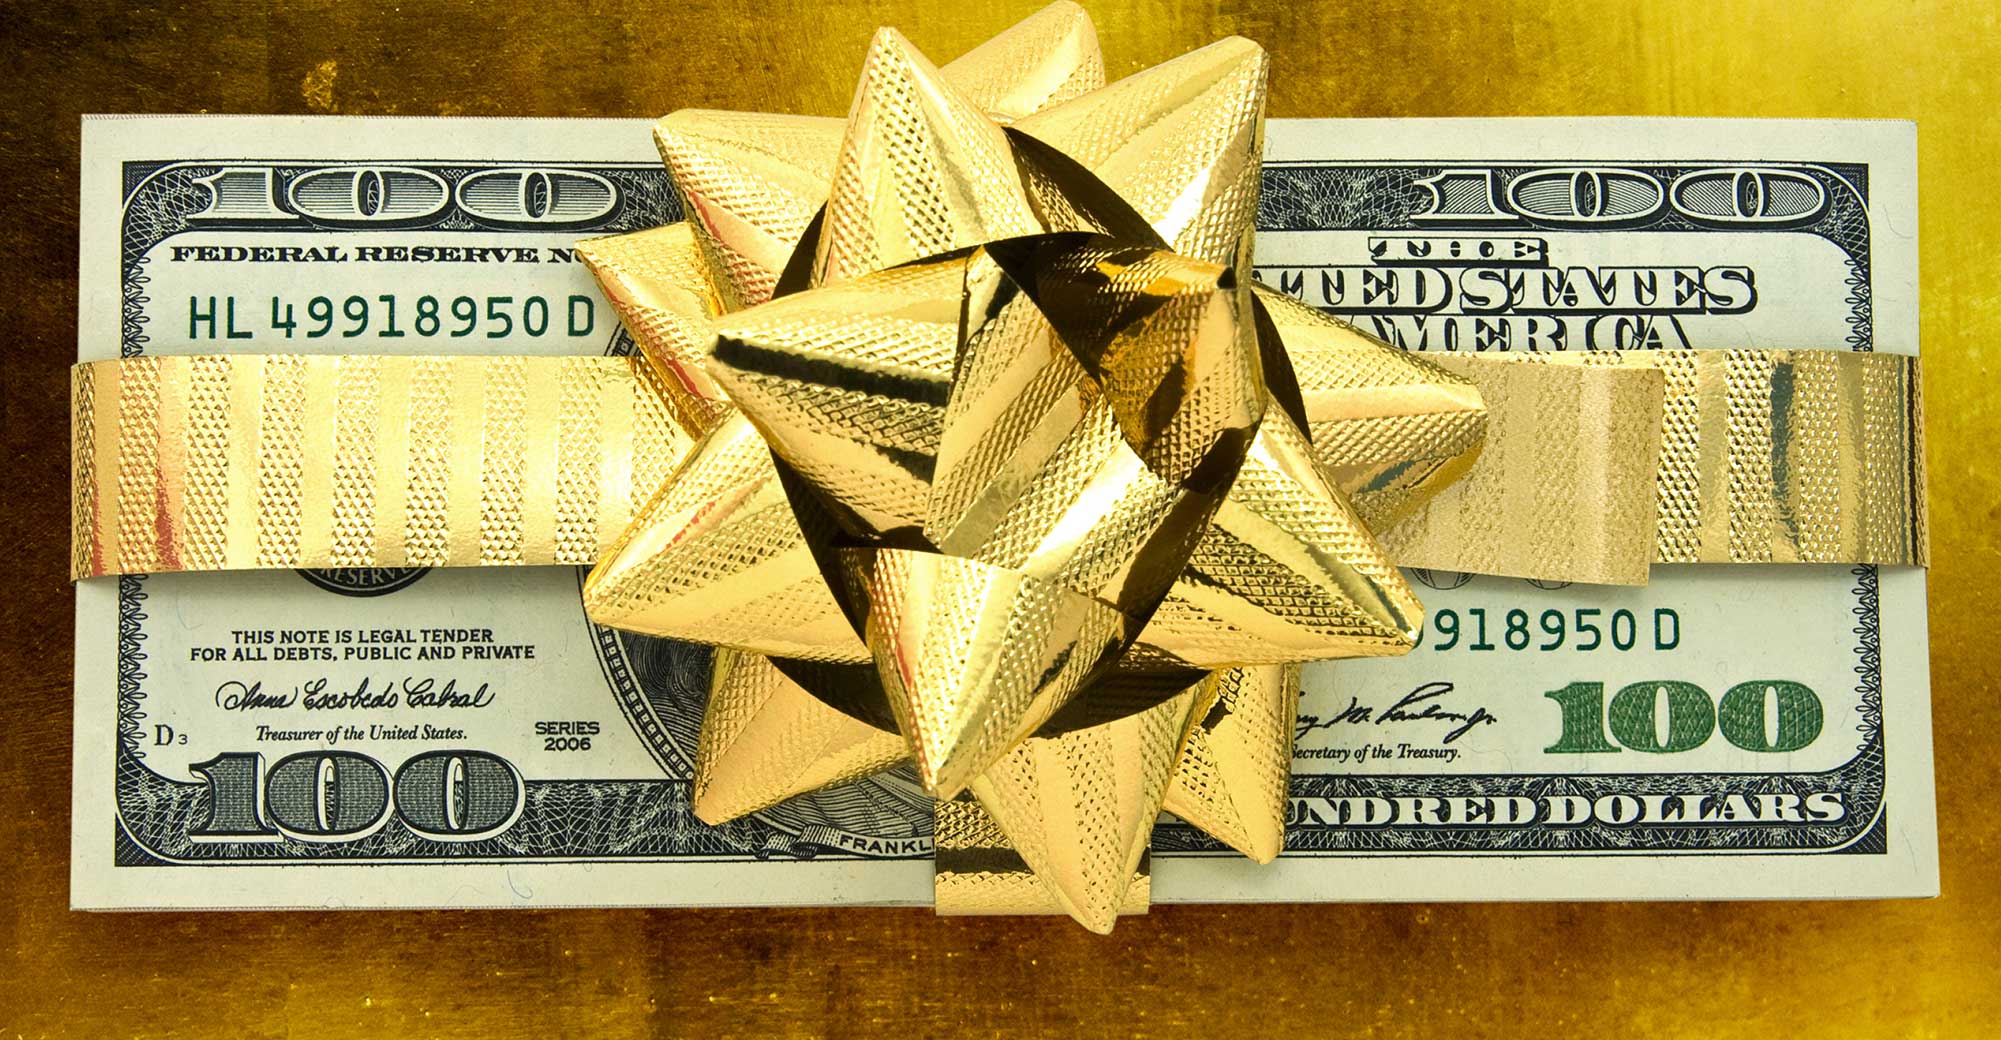 How Smart Are You About the Annual and Lifetime Gift Tax Exclusions? |  Wealth Management